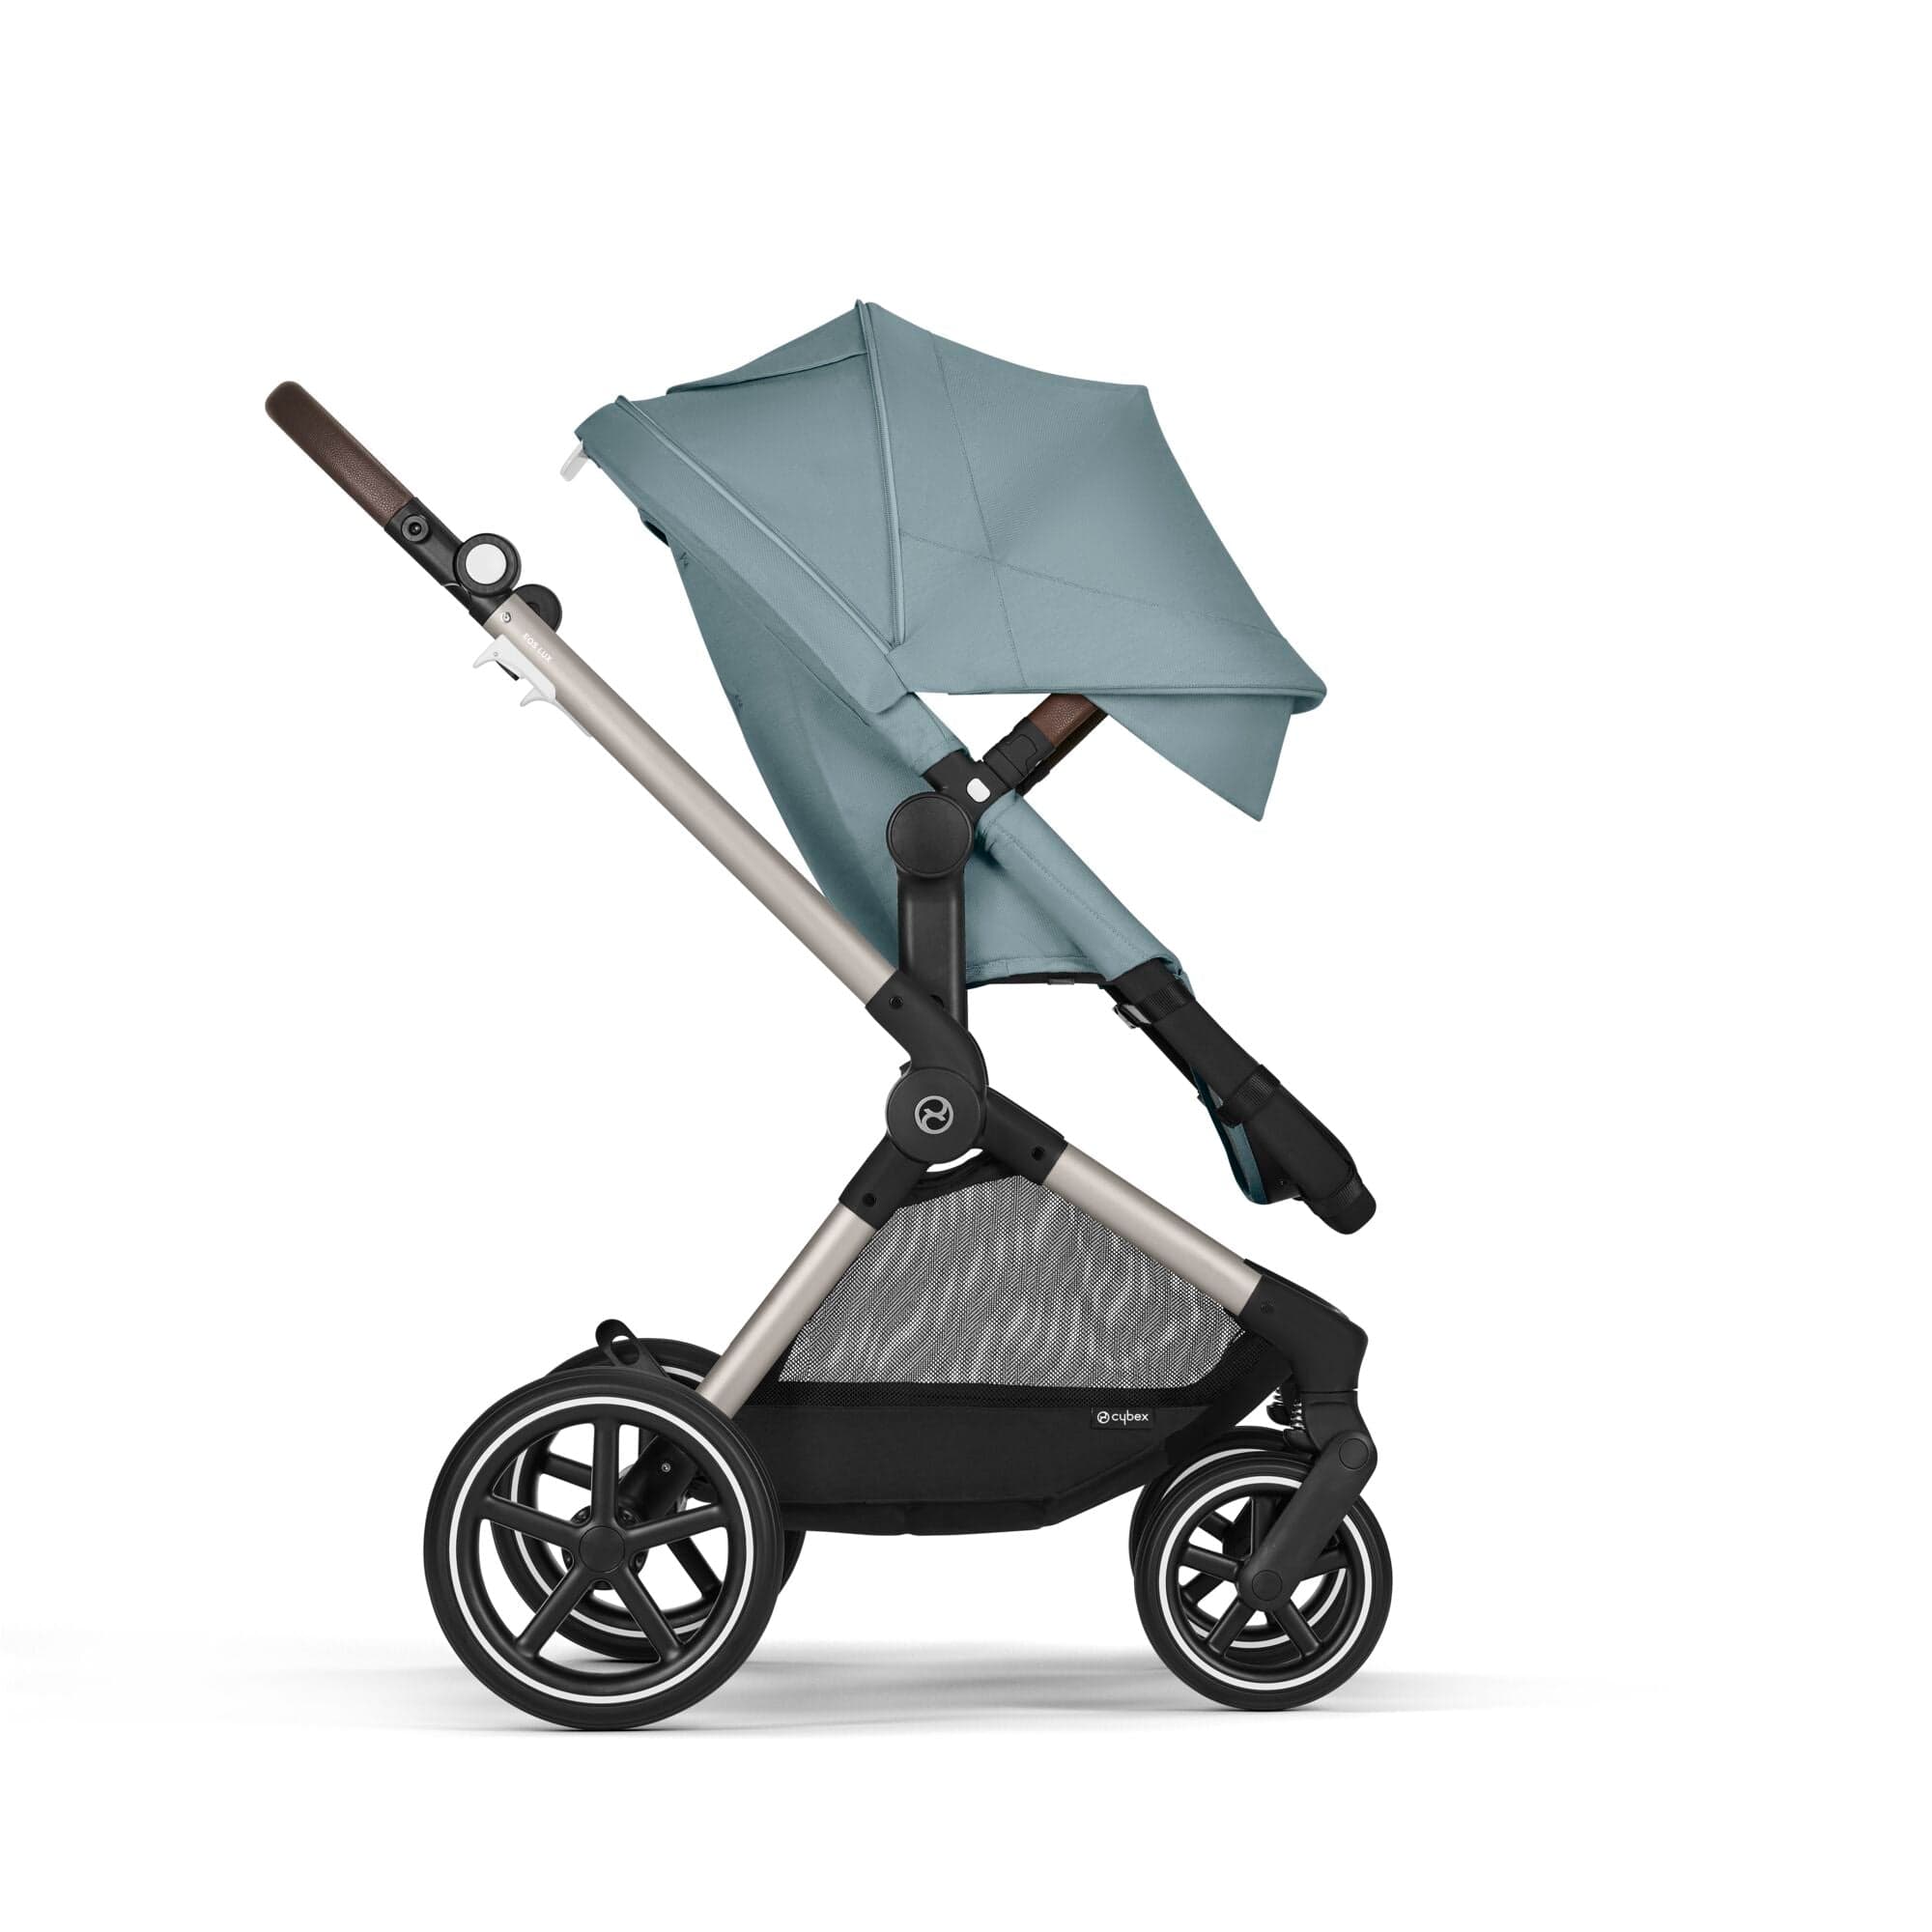 Cybex Eos Lux Stroller in Sky Blue Travel Systems 522003831 4063846368150